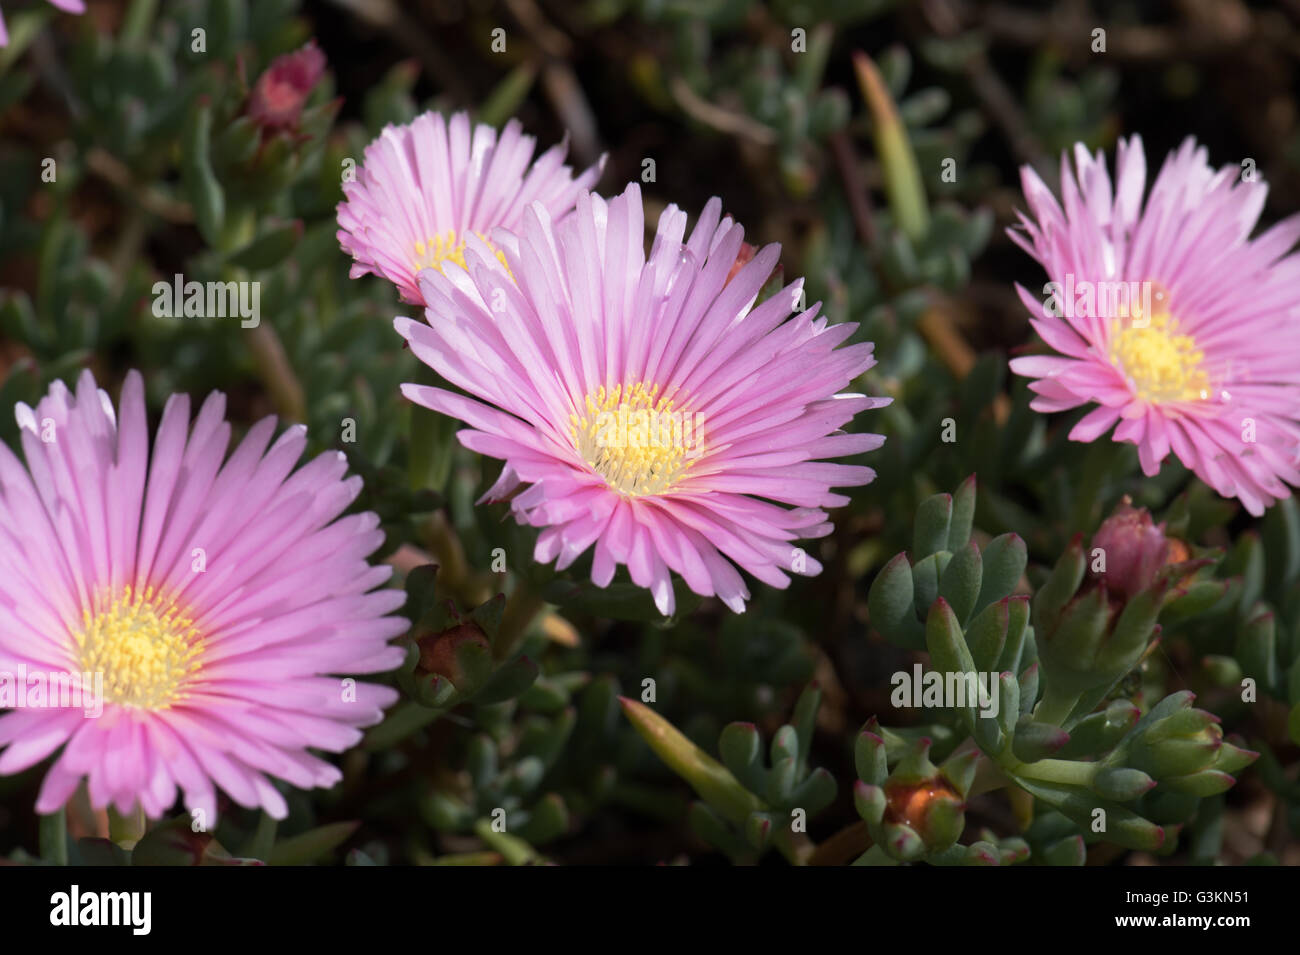 The delicate pink flowers of Lampranthus spectabilis. Stock Photo